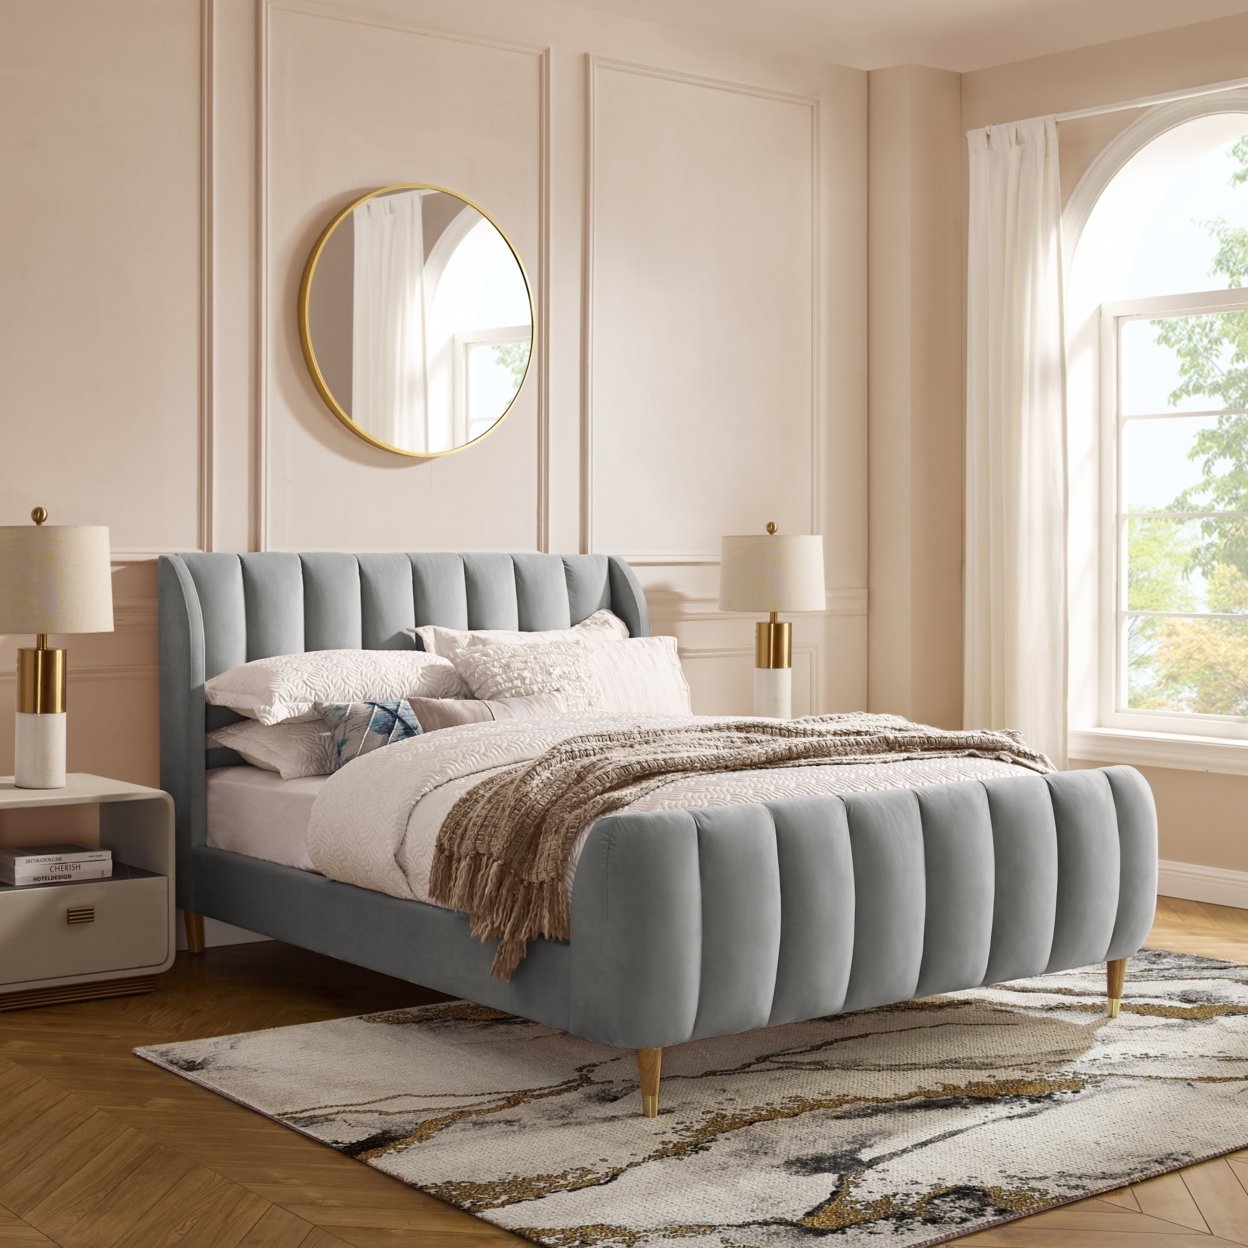 Sana Bed-Upholstered-Channel Tufted-Slats Included - Grey, King